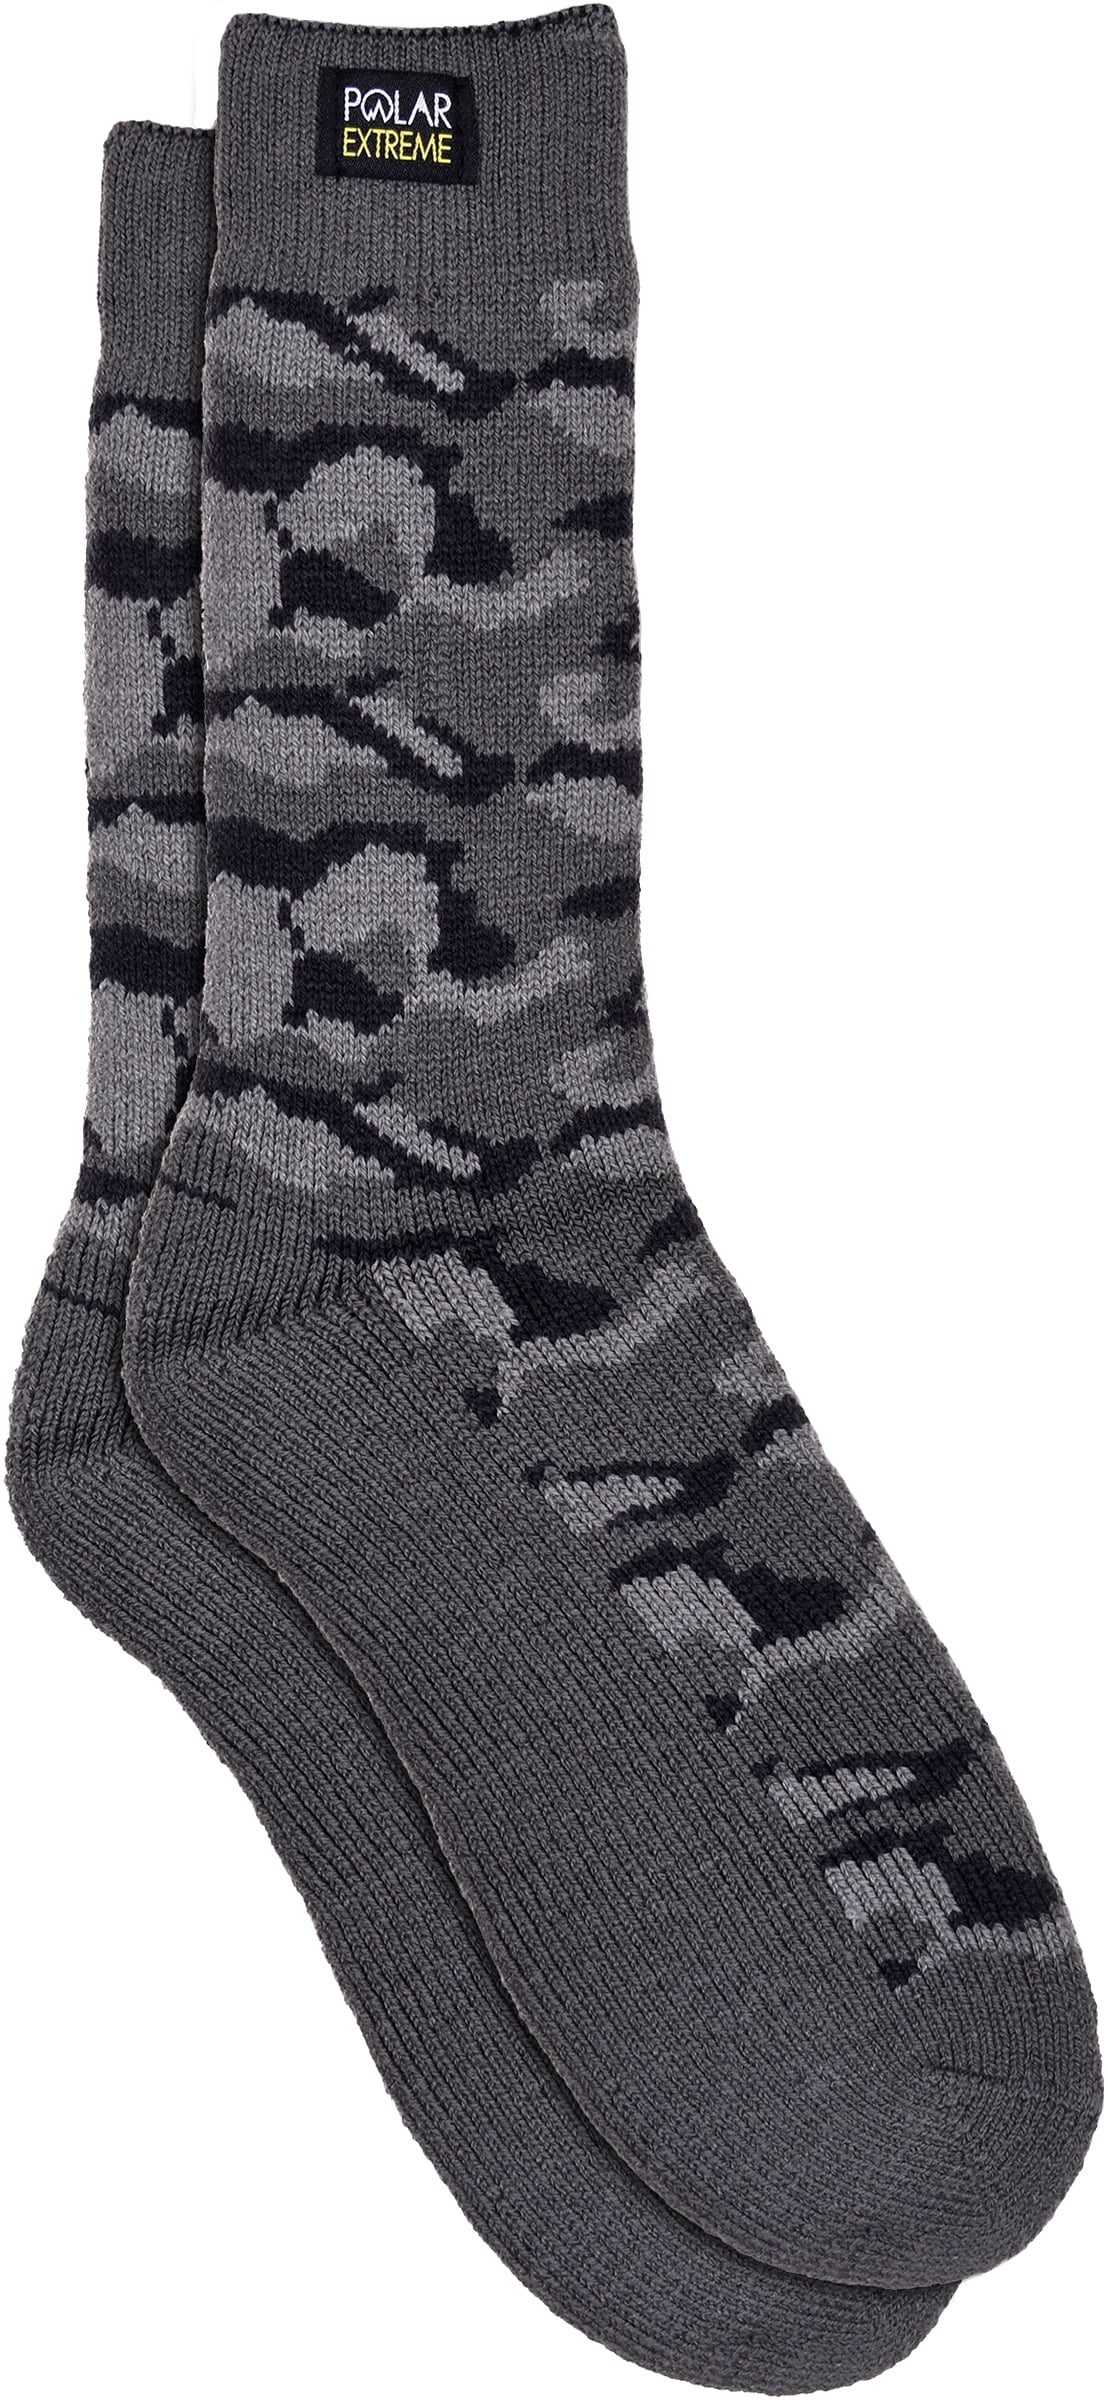 Men's Socks Polar Extreme Insulated Thermal Camouflage Camo Pattern 3 Colors 